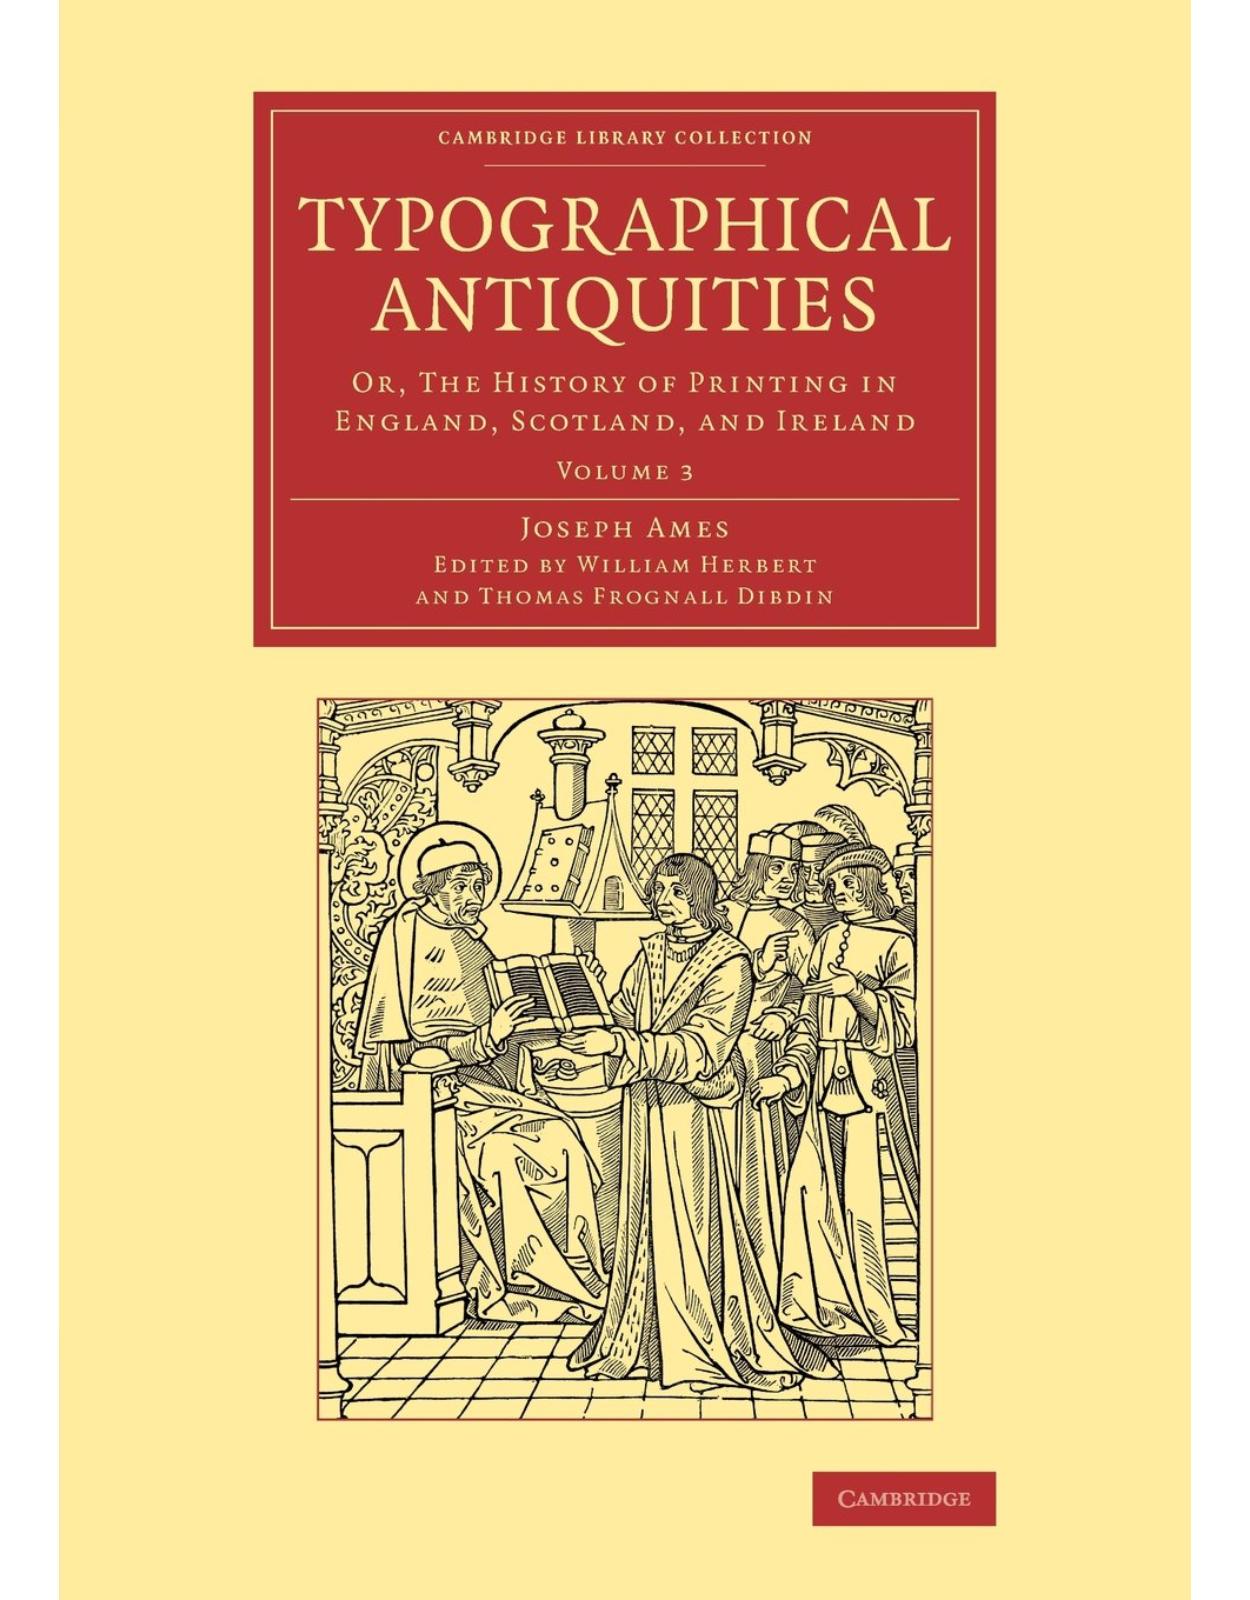 Typographical Antiquities 4 Volume Set: Typographical Antiquities: Or, The History of Printing in England, Scotland, and Ireland: Volume 3 (Cambridge ... of Printing, Publishing and Libraries)